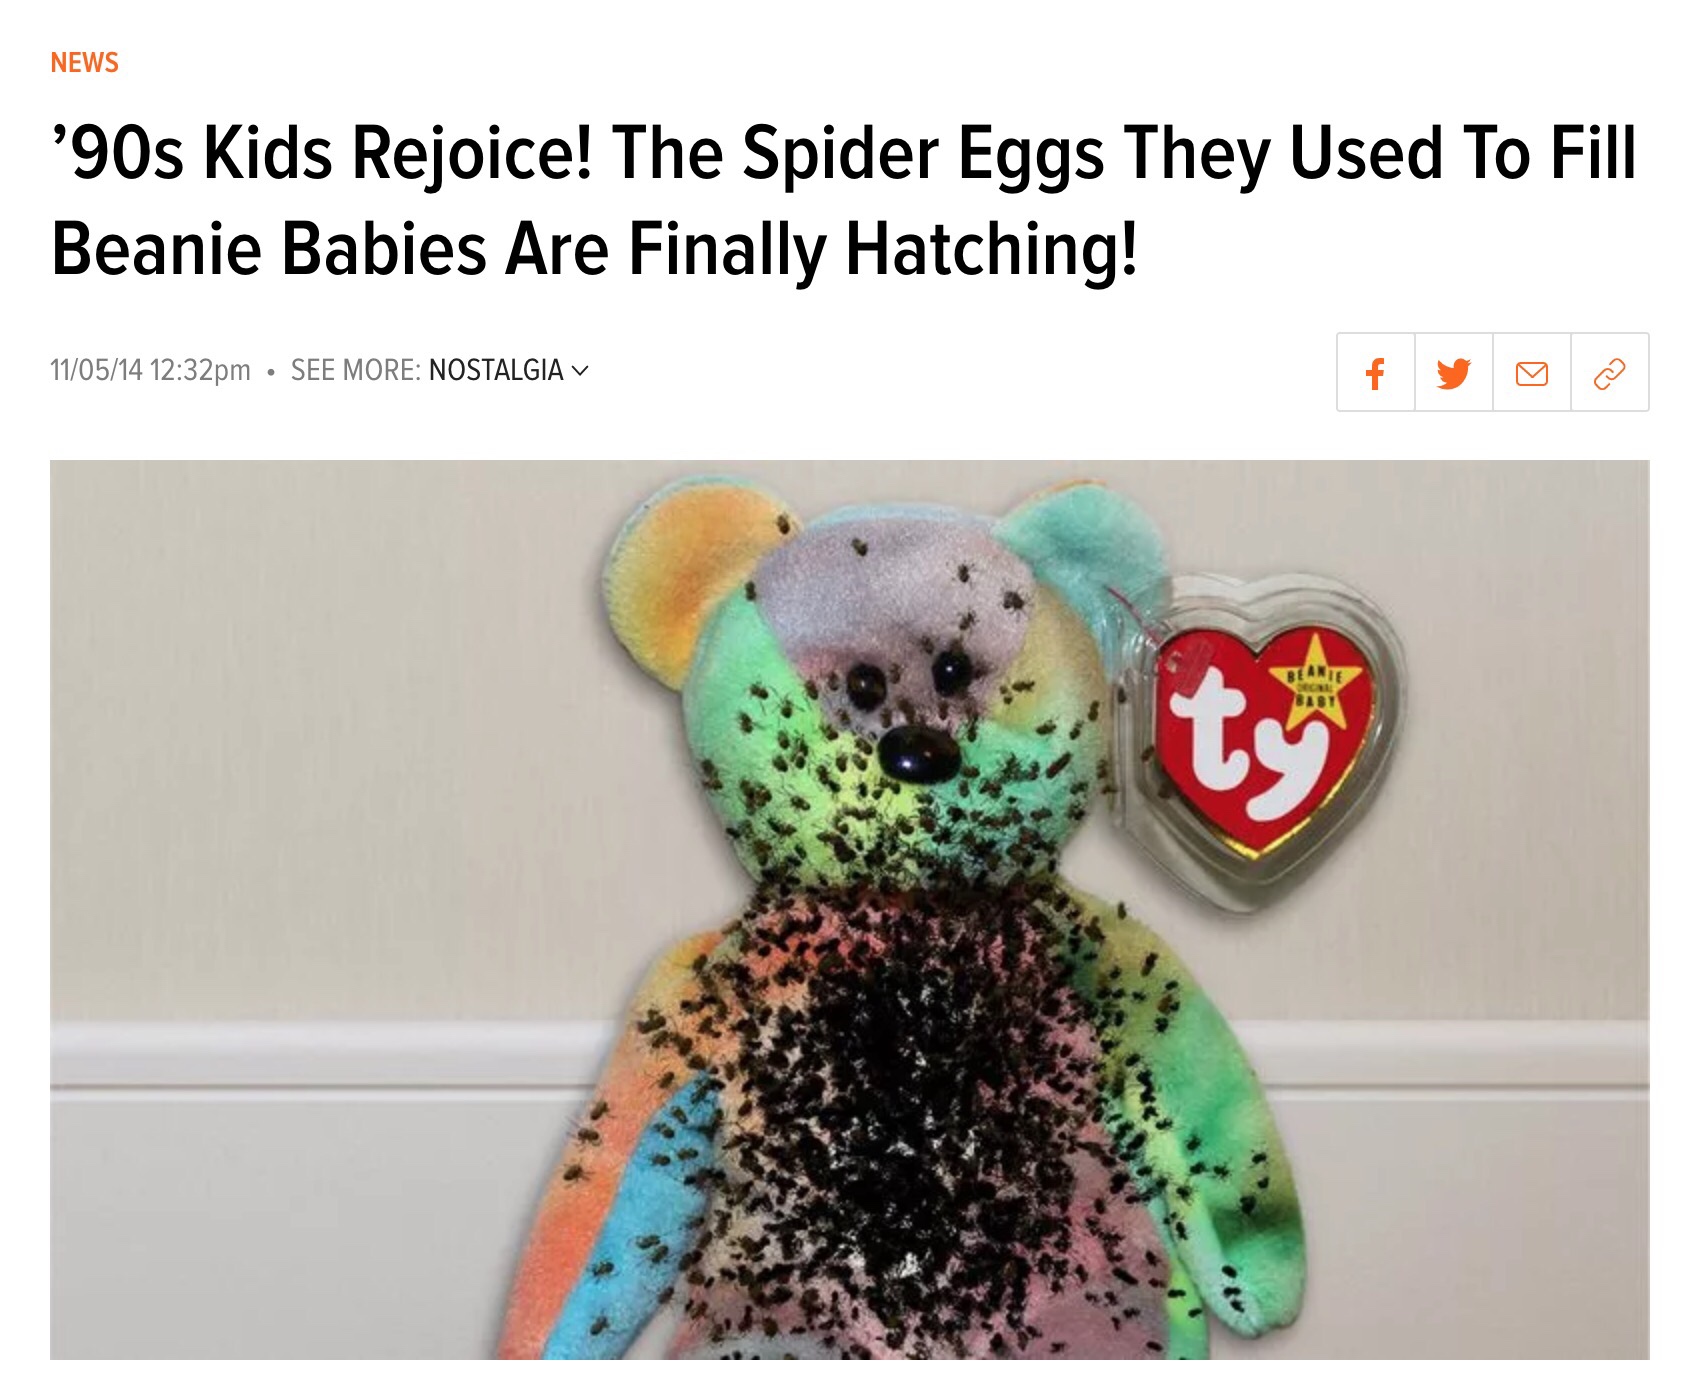 beanie babies filled with spider eggs - News '90s Kids Rejoice! The Spider Eggs They Used To Fill Beanie Babies Are Finally Hatching! 110514 pm See More Nostalgia V Bearte 8131